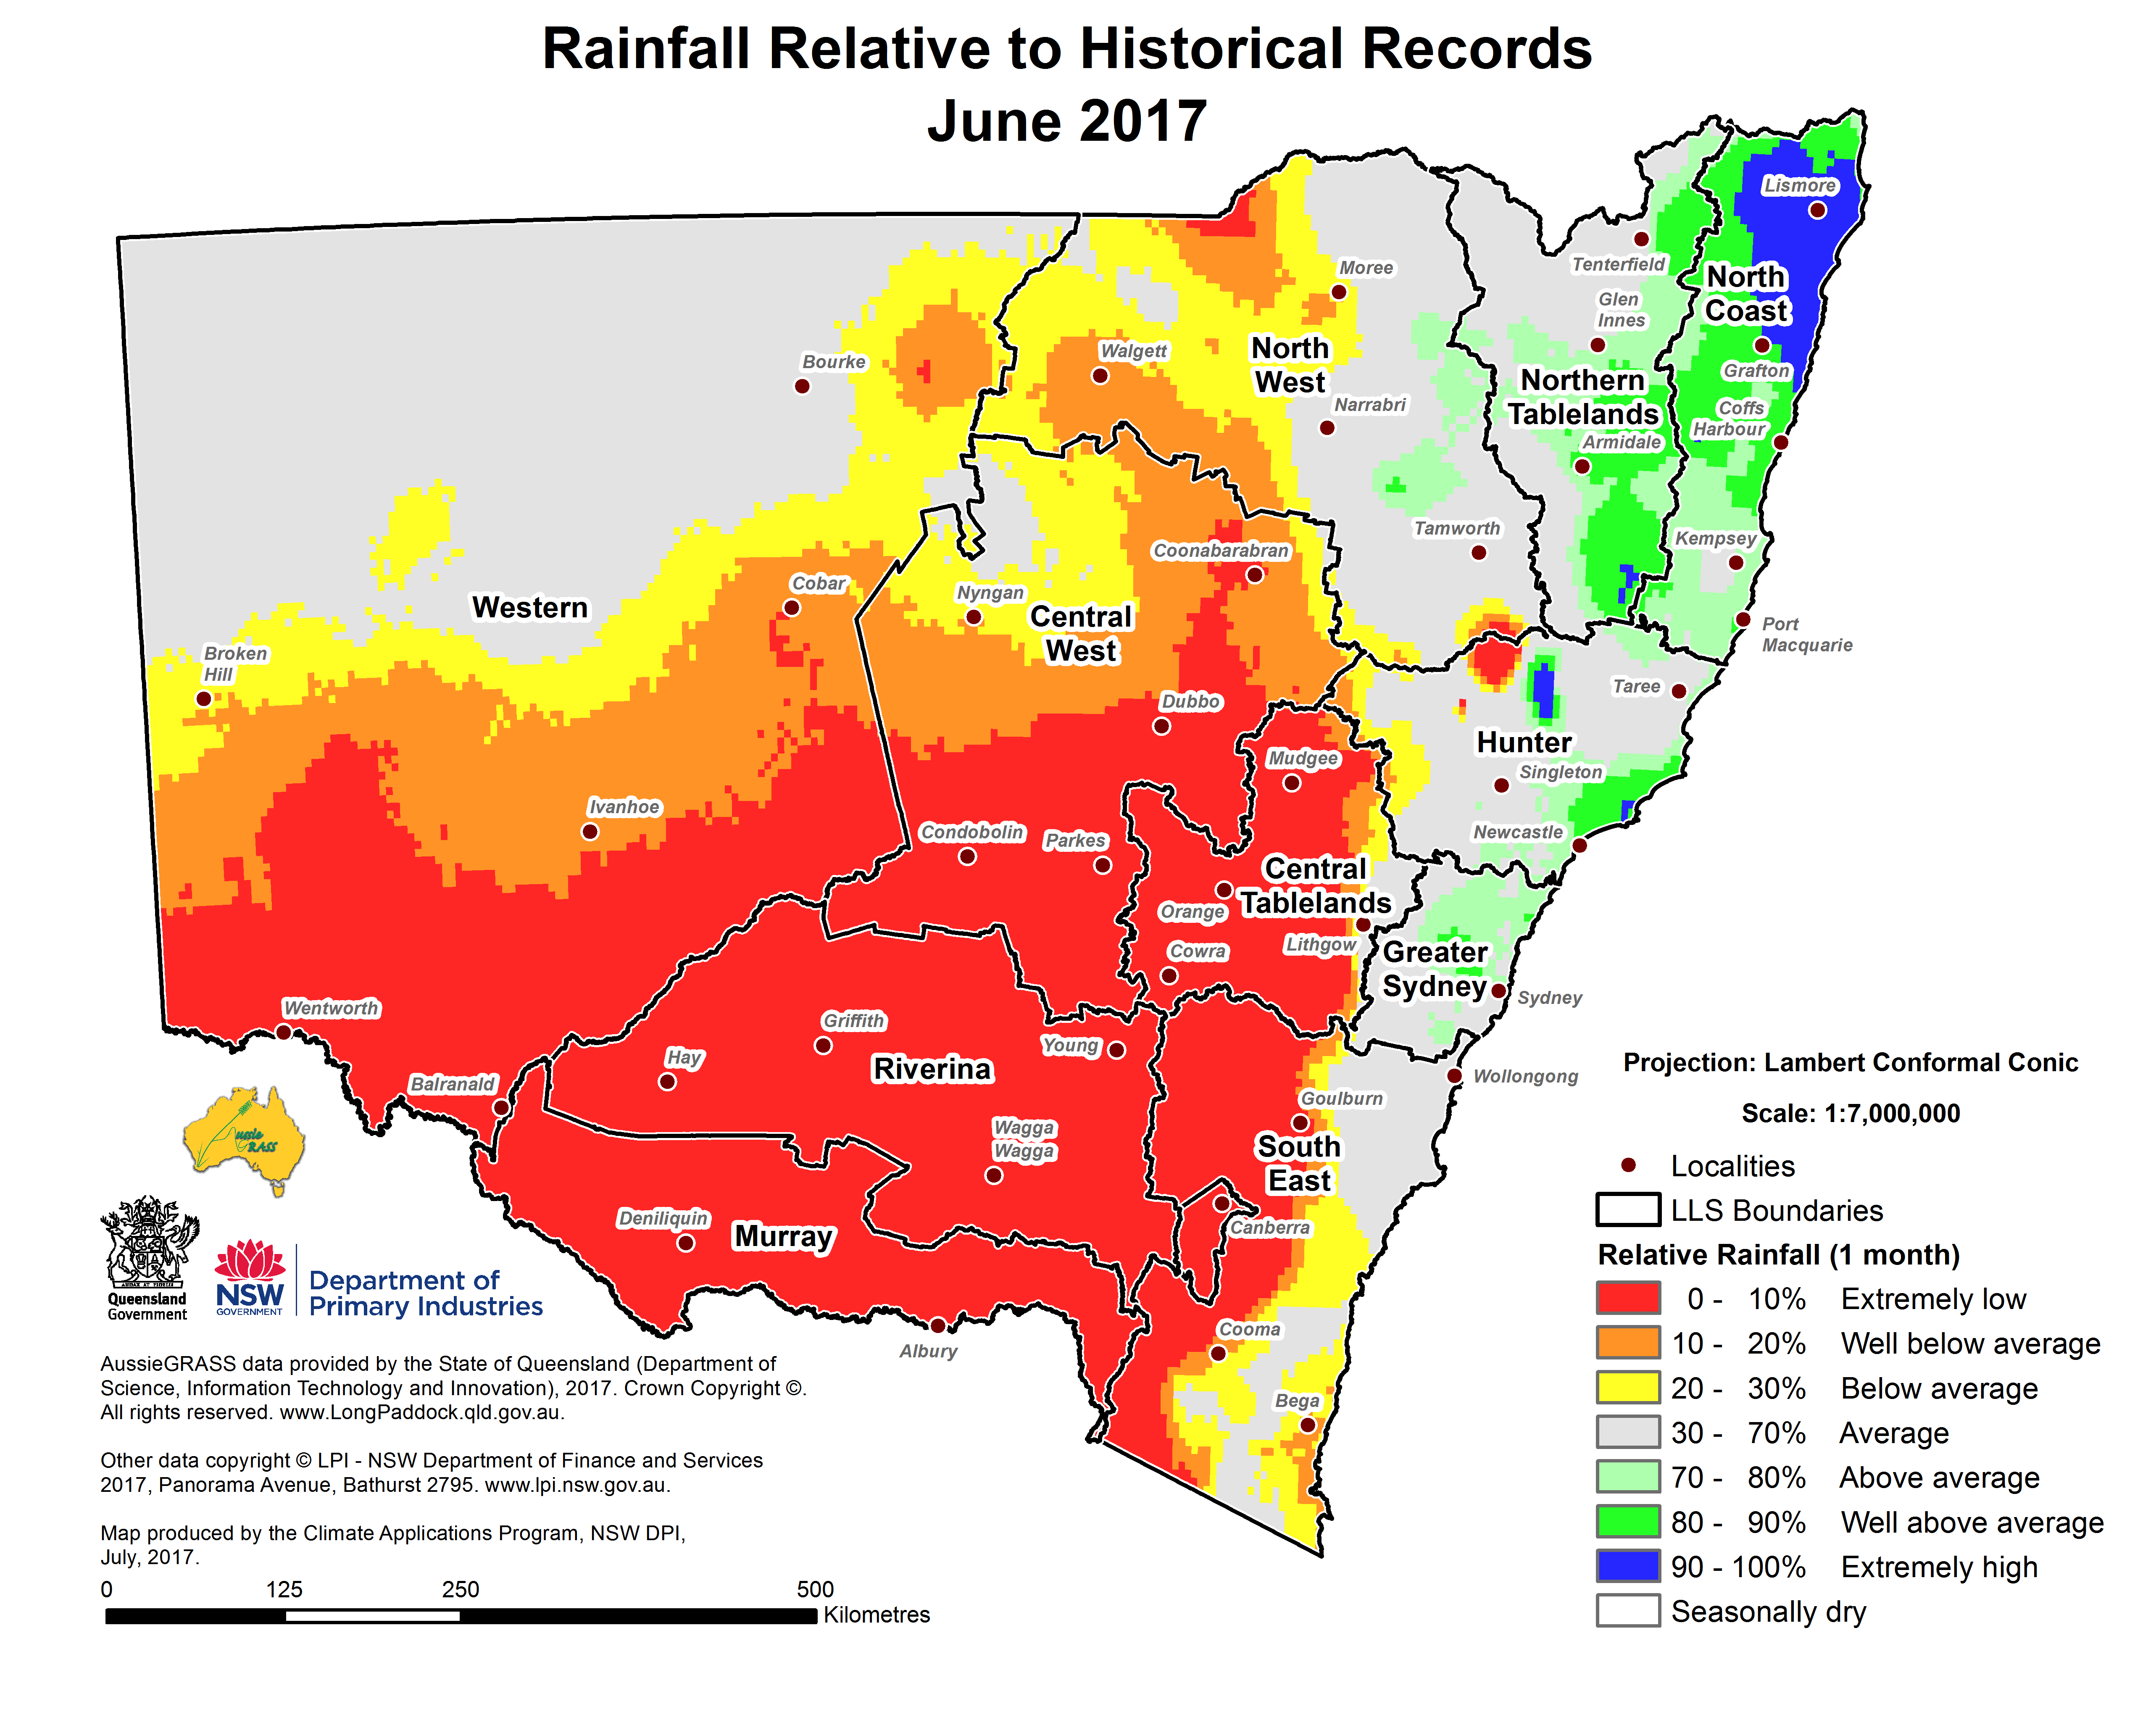 map of NSW indicating relative rainfall to historical records as at June 2017